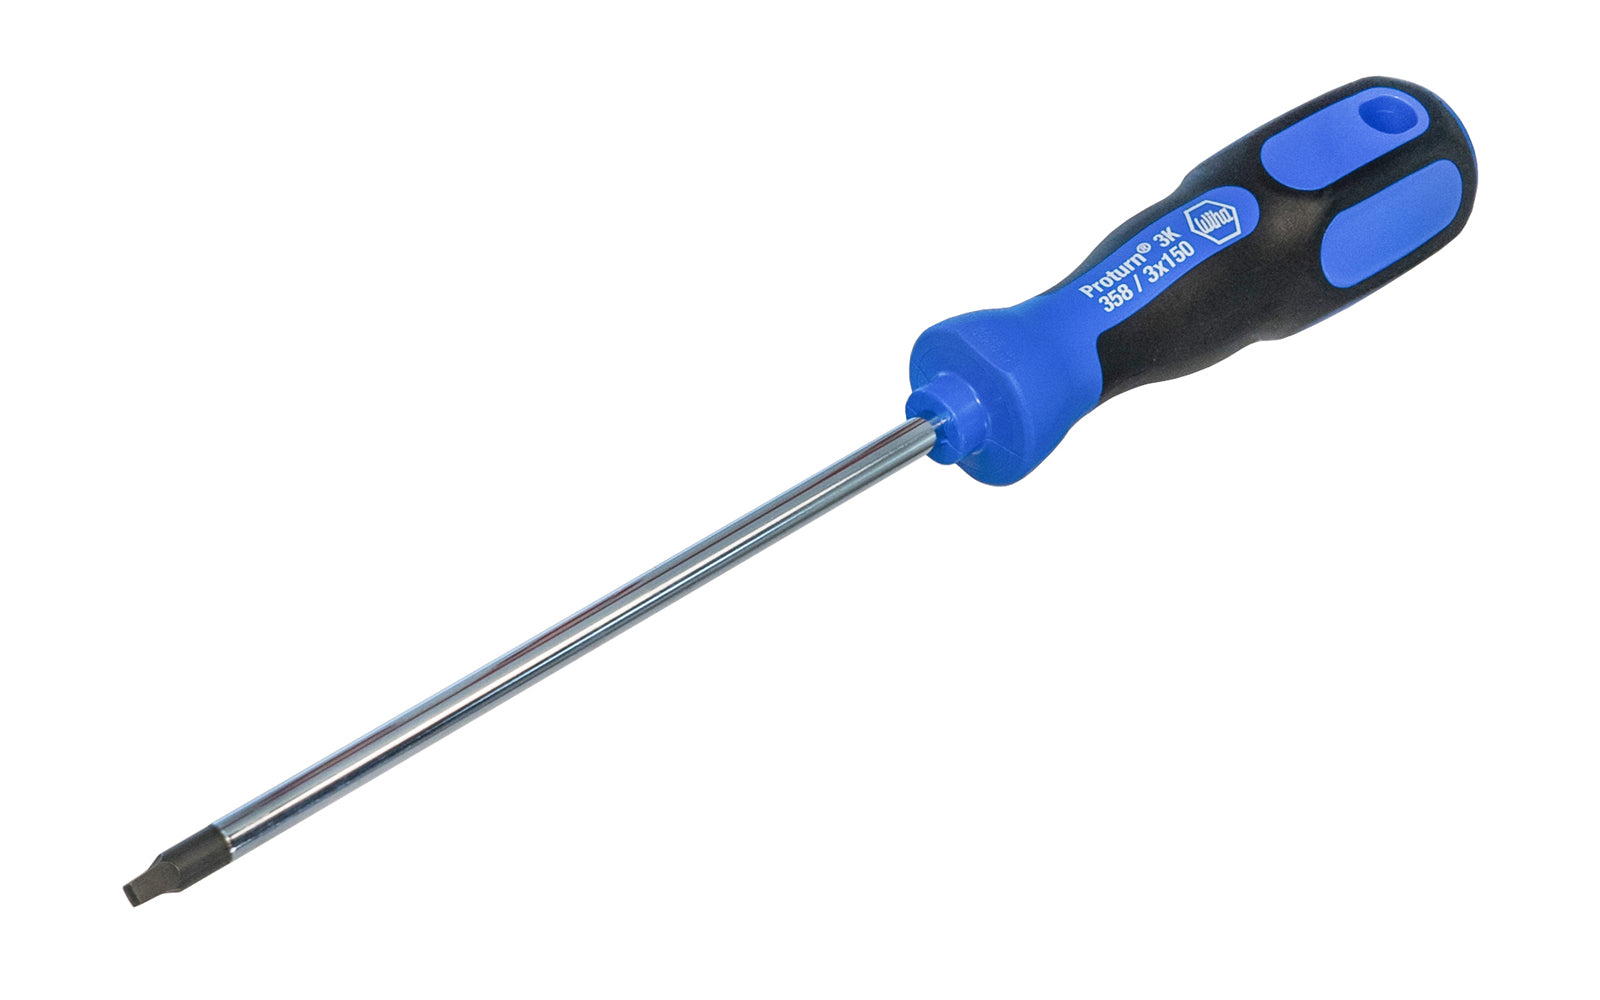 High quality Wiha No. 3 square screwdriver made out of special CVM steel that is 60 HRC hardened durability. Bright chrome shaft with soft grip ergonomic handle. Wiha Model No. 45833 - "Proturn" 3K 358 / #3x150.   Made in Germany - No. 3 SQ Screwdriver - Blue Handle - 084705458335 - # 3 Square Screwdriver - German Made